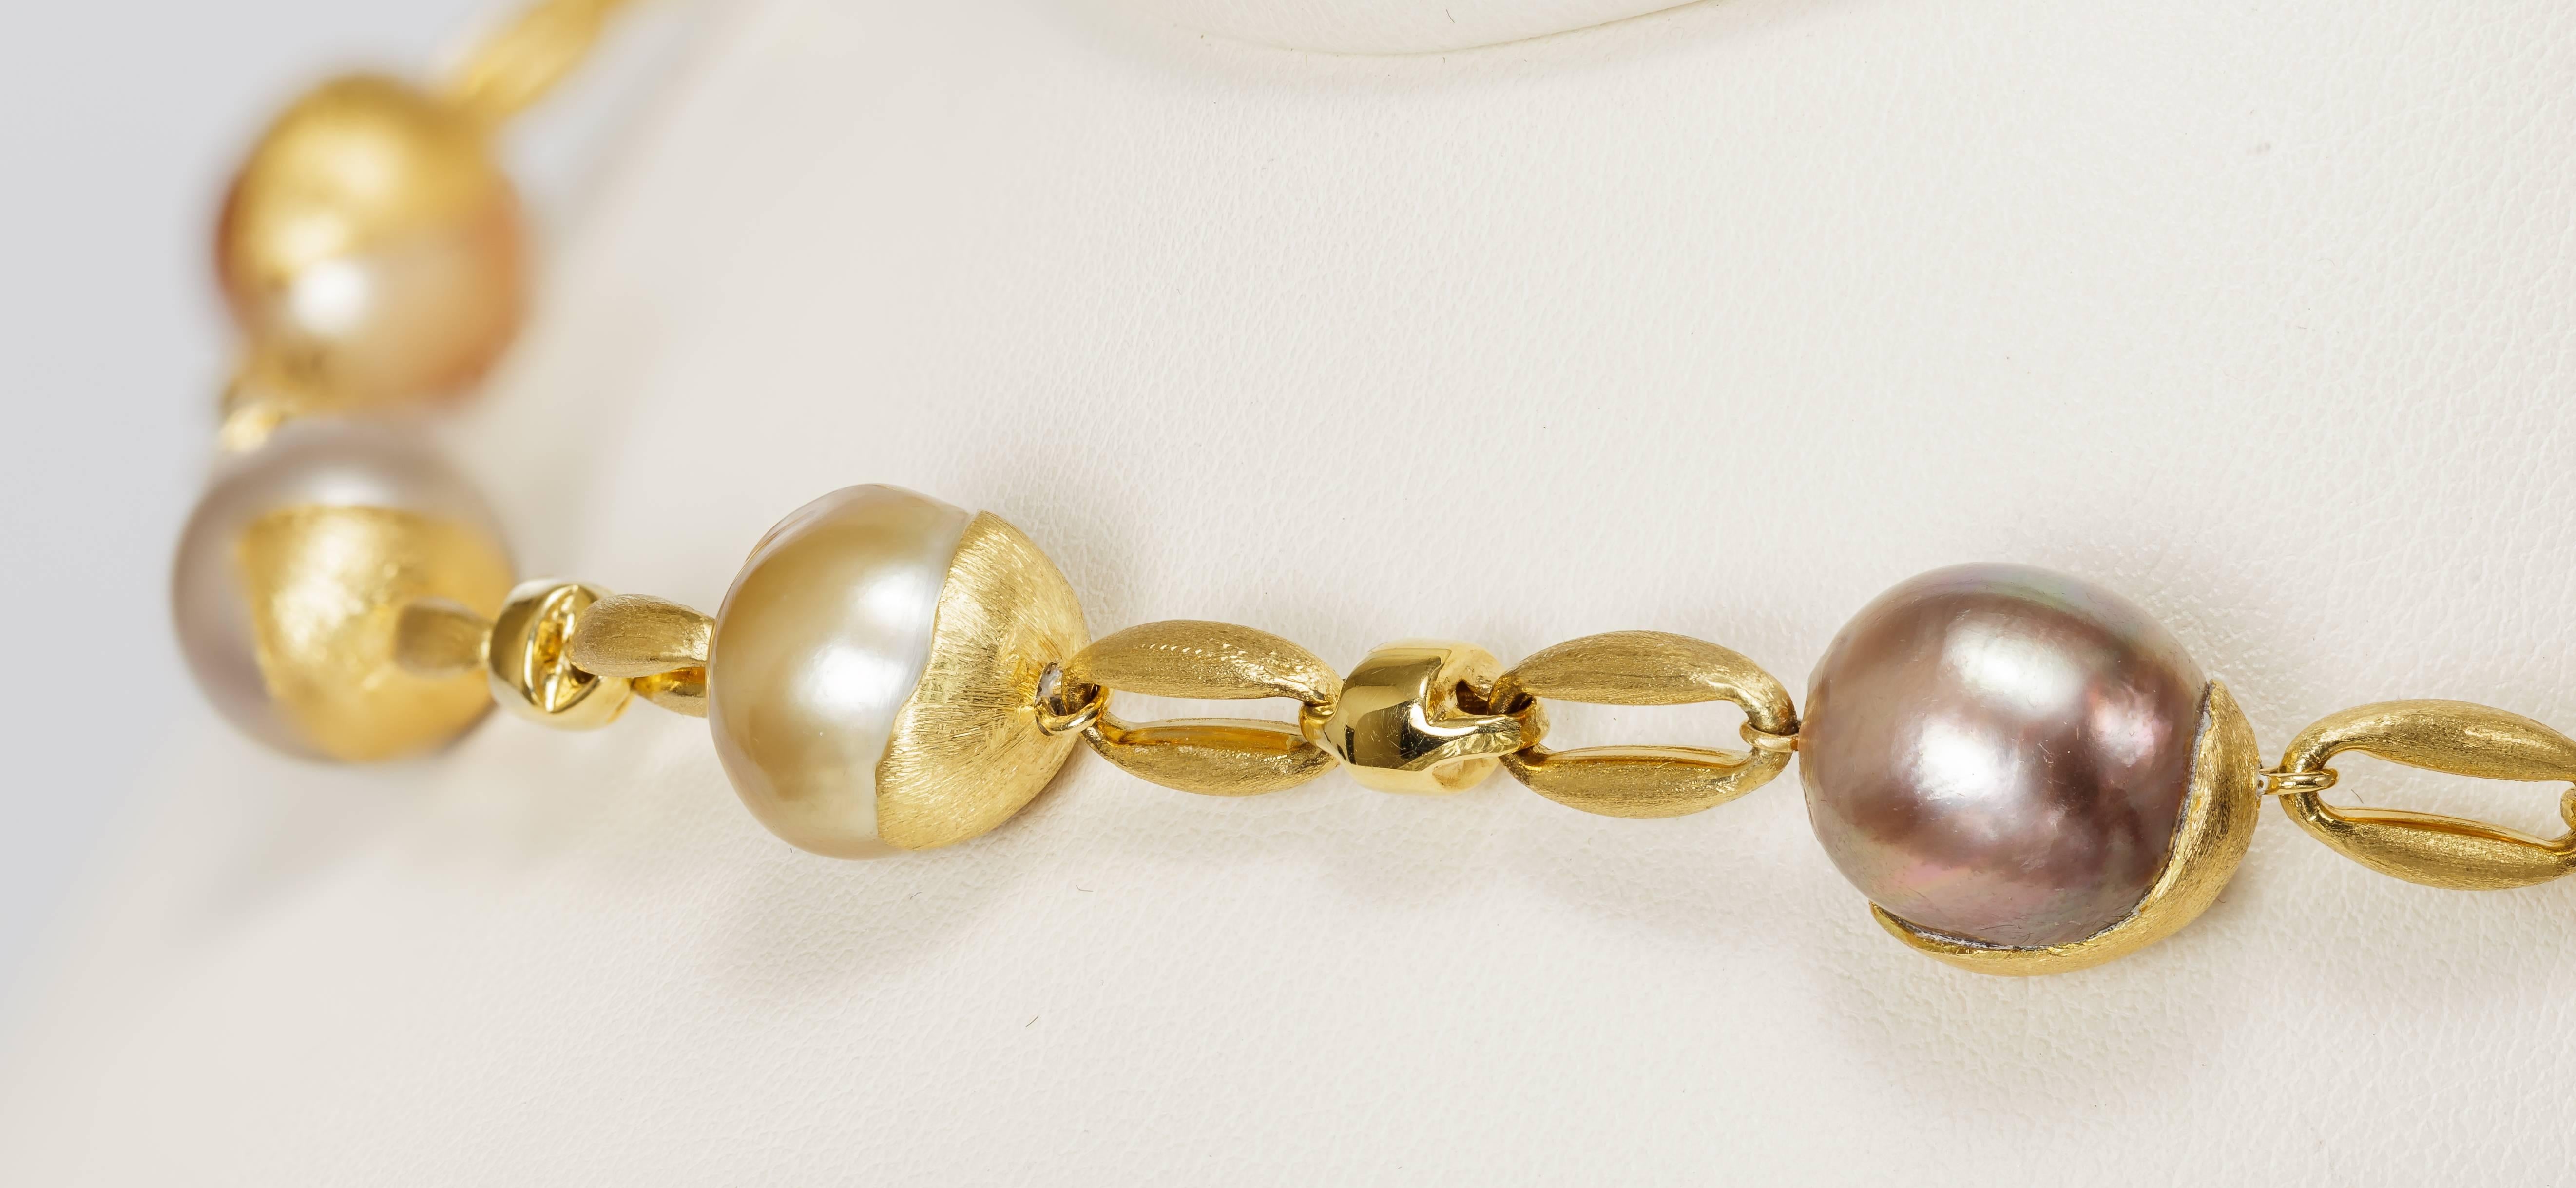 Yvel Multicolored South Sea Pearl Necklace 18 Karat Yellow Gold In New Condition For Sale In Houston, TX